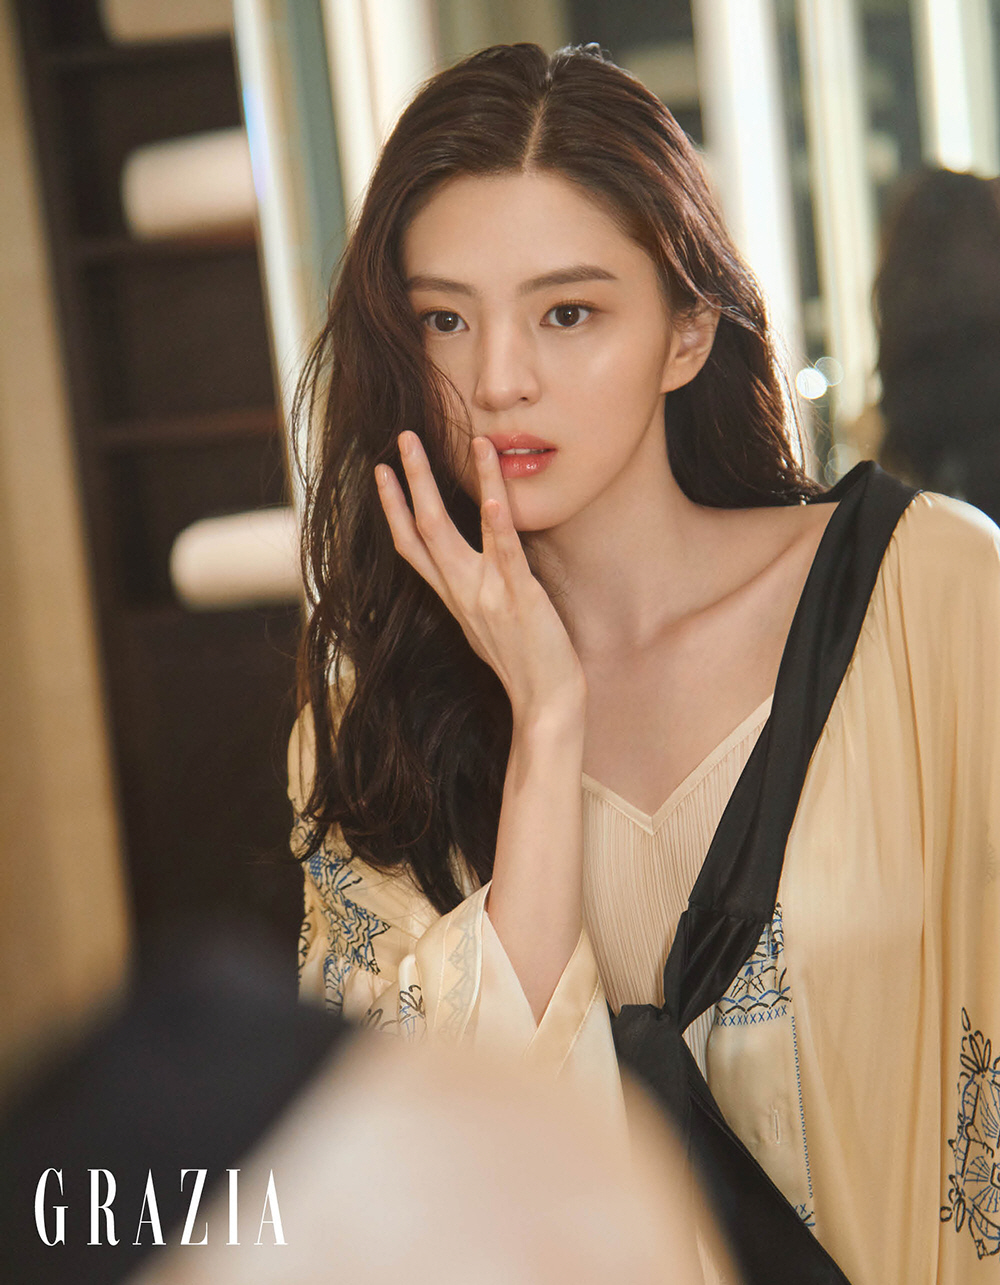 han-so-hee-captures-fans-hearts-with-photoshoot-by-grazia-magazine-2